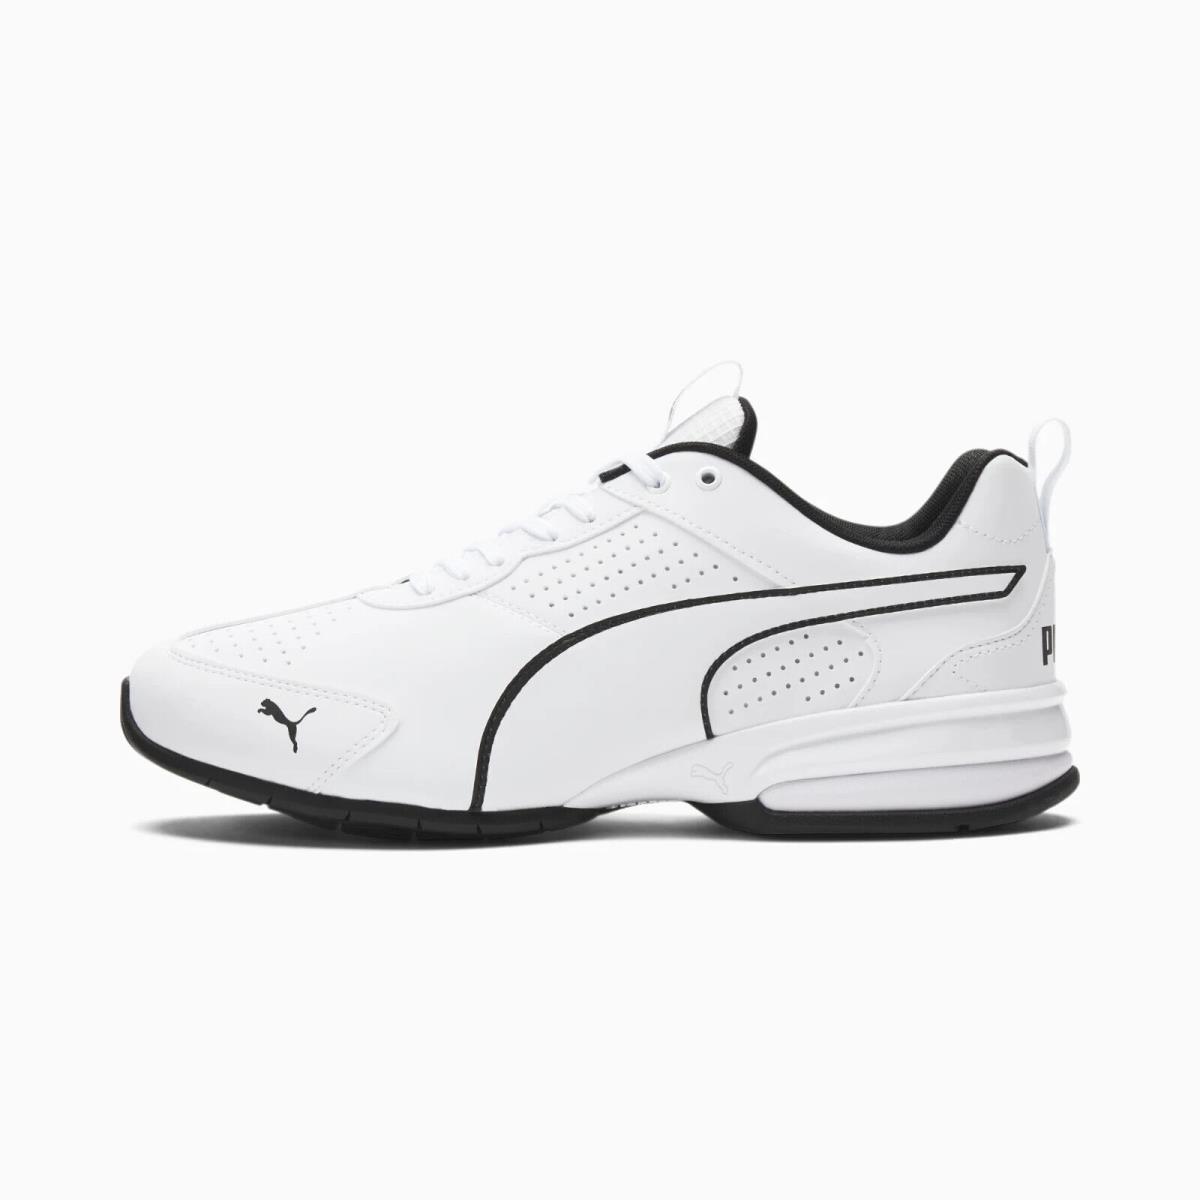 Puma Tazon Advance Leather Running Men`s White Sneakers Athletic Shoes 377232 04